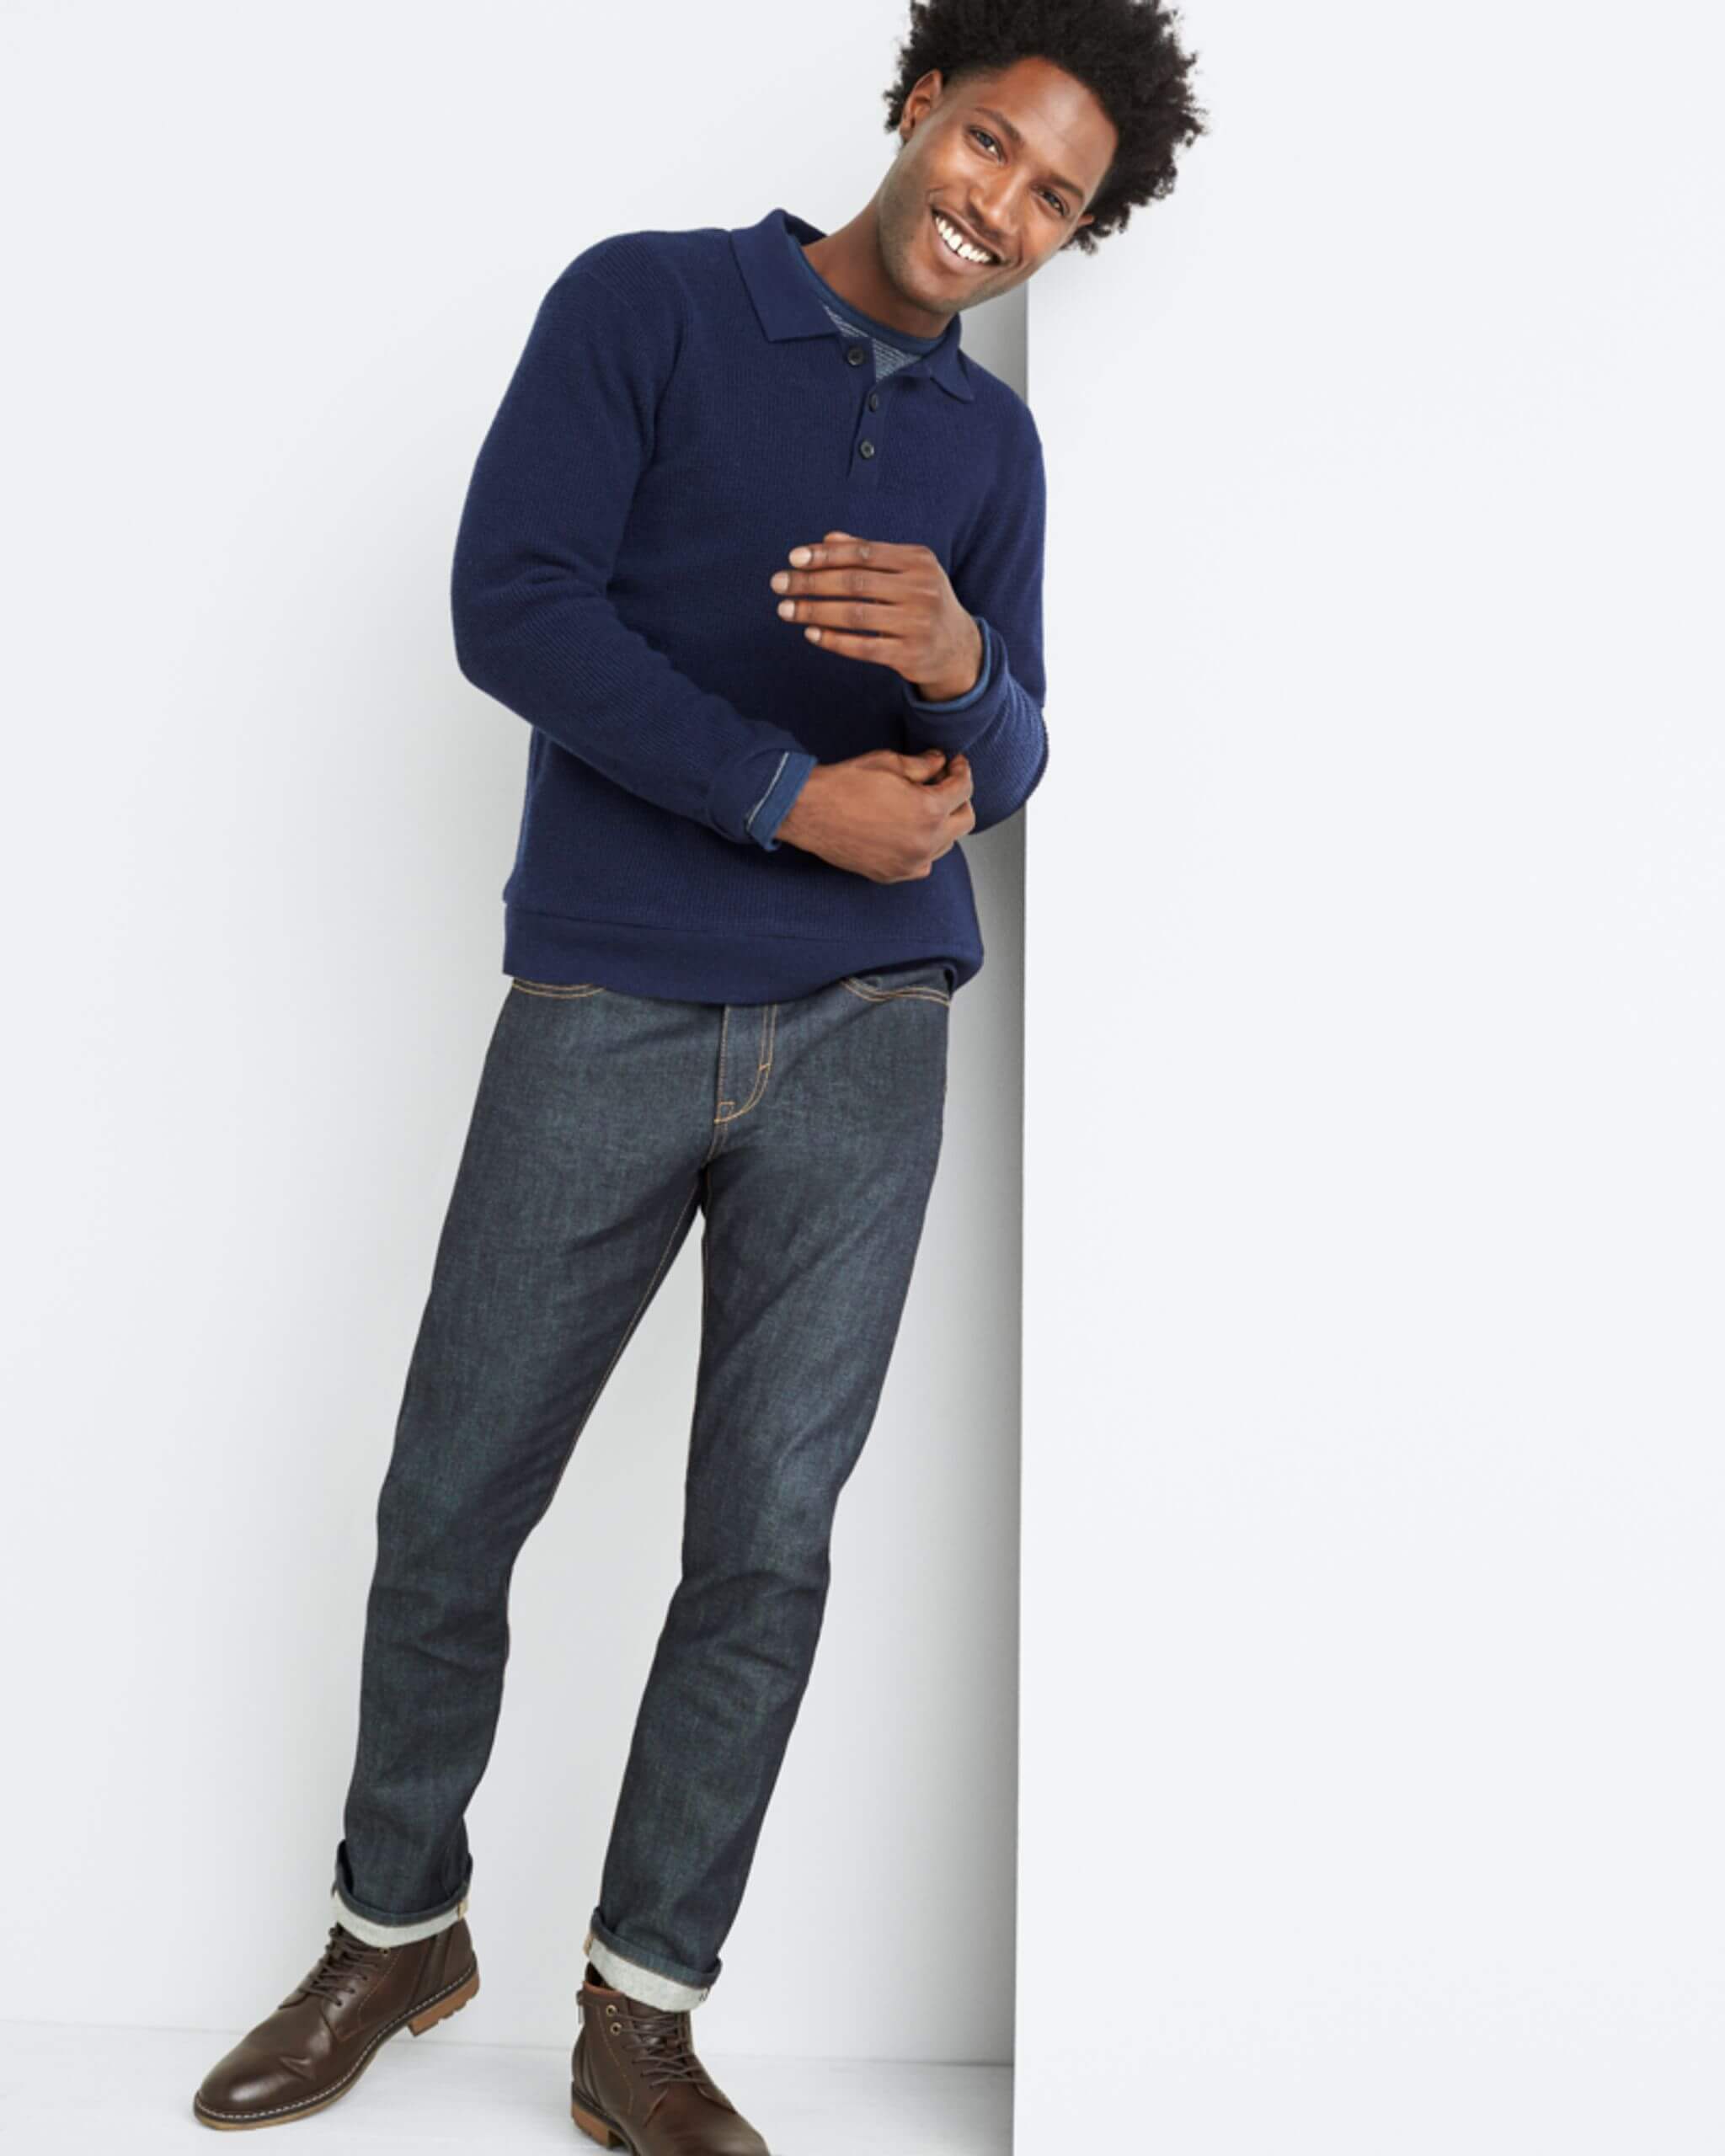 Best Jeans for Men According to Style Experts